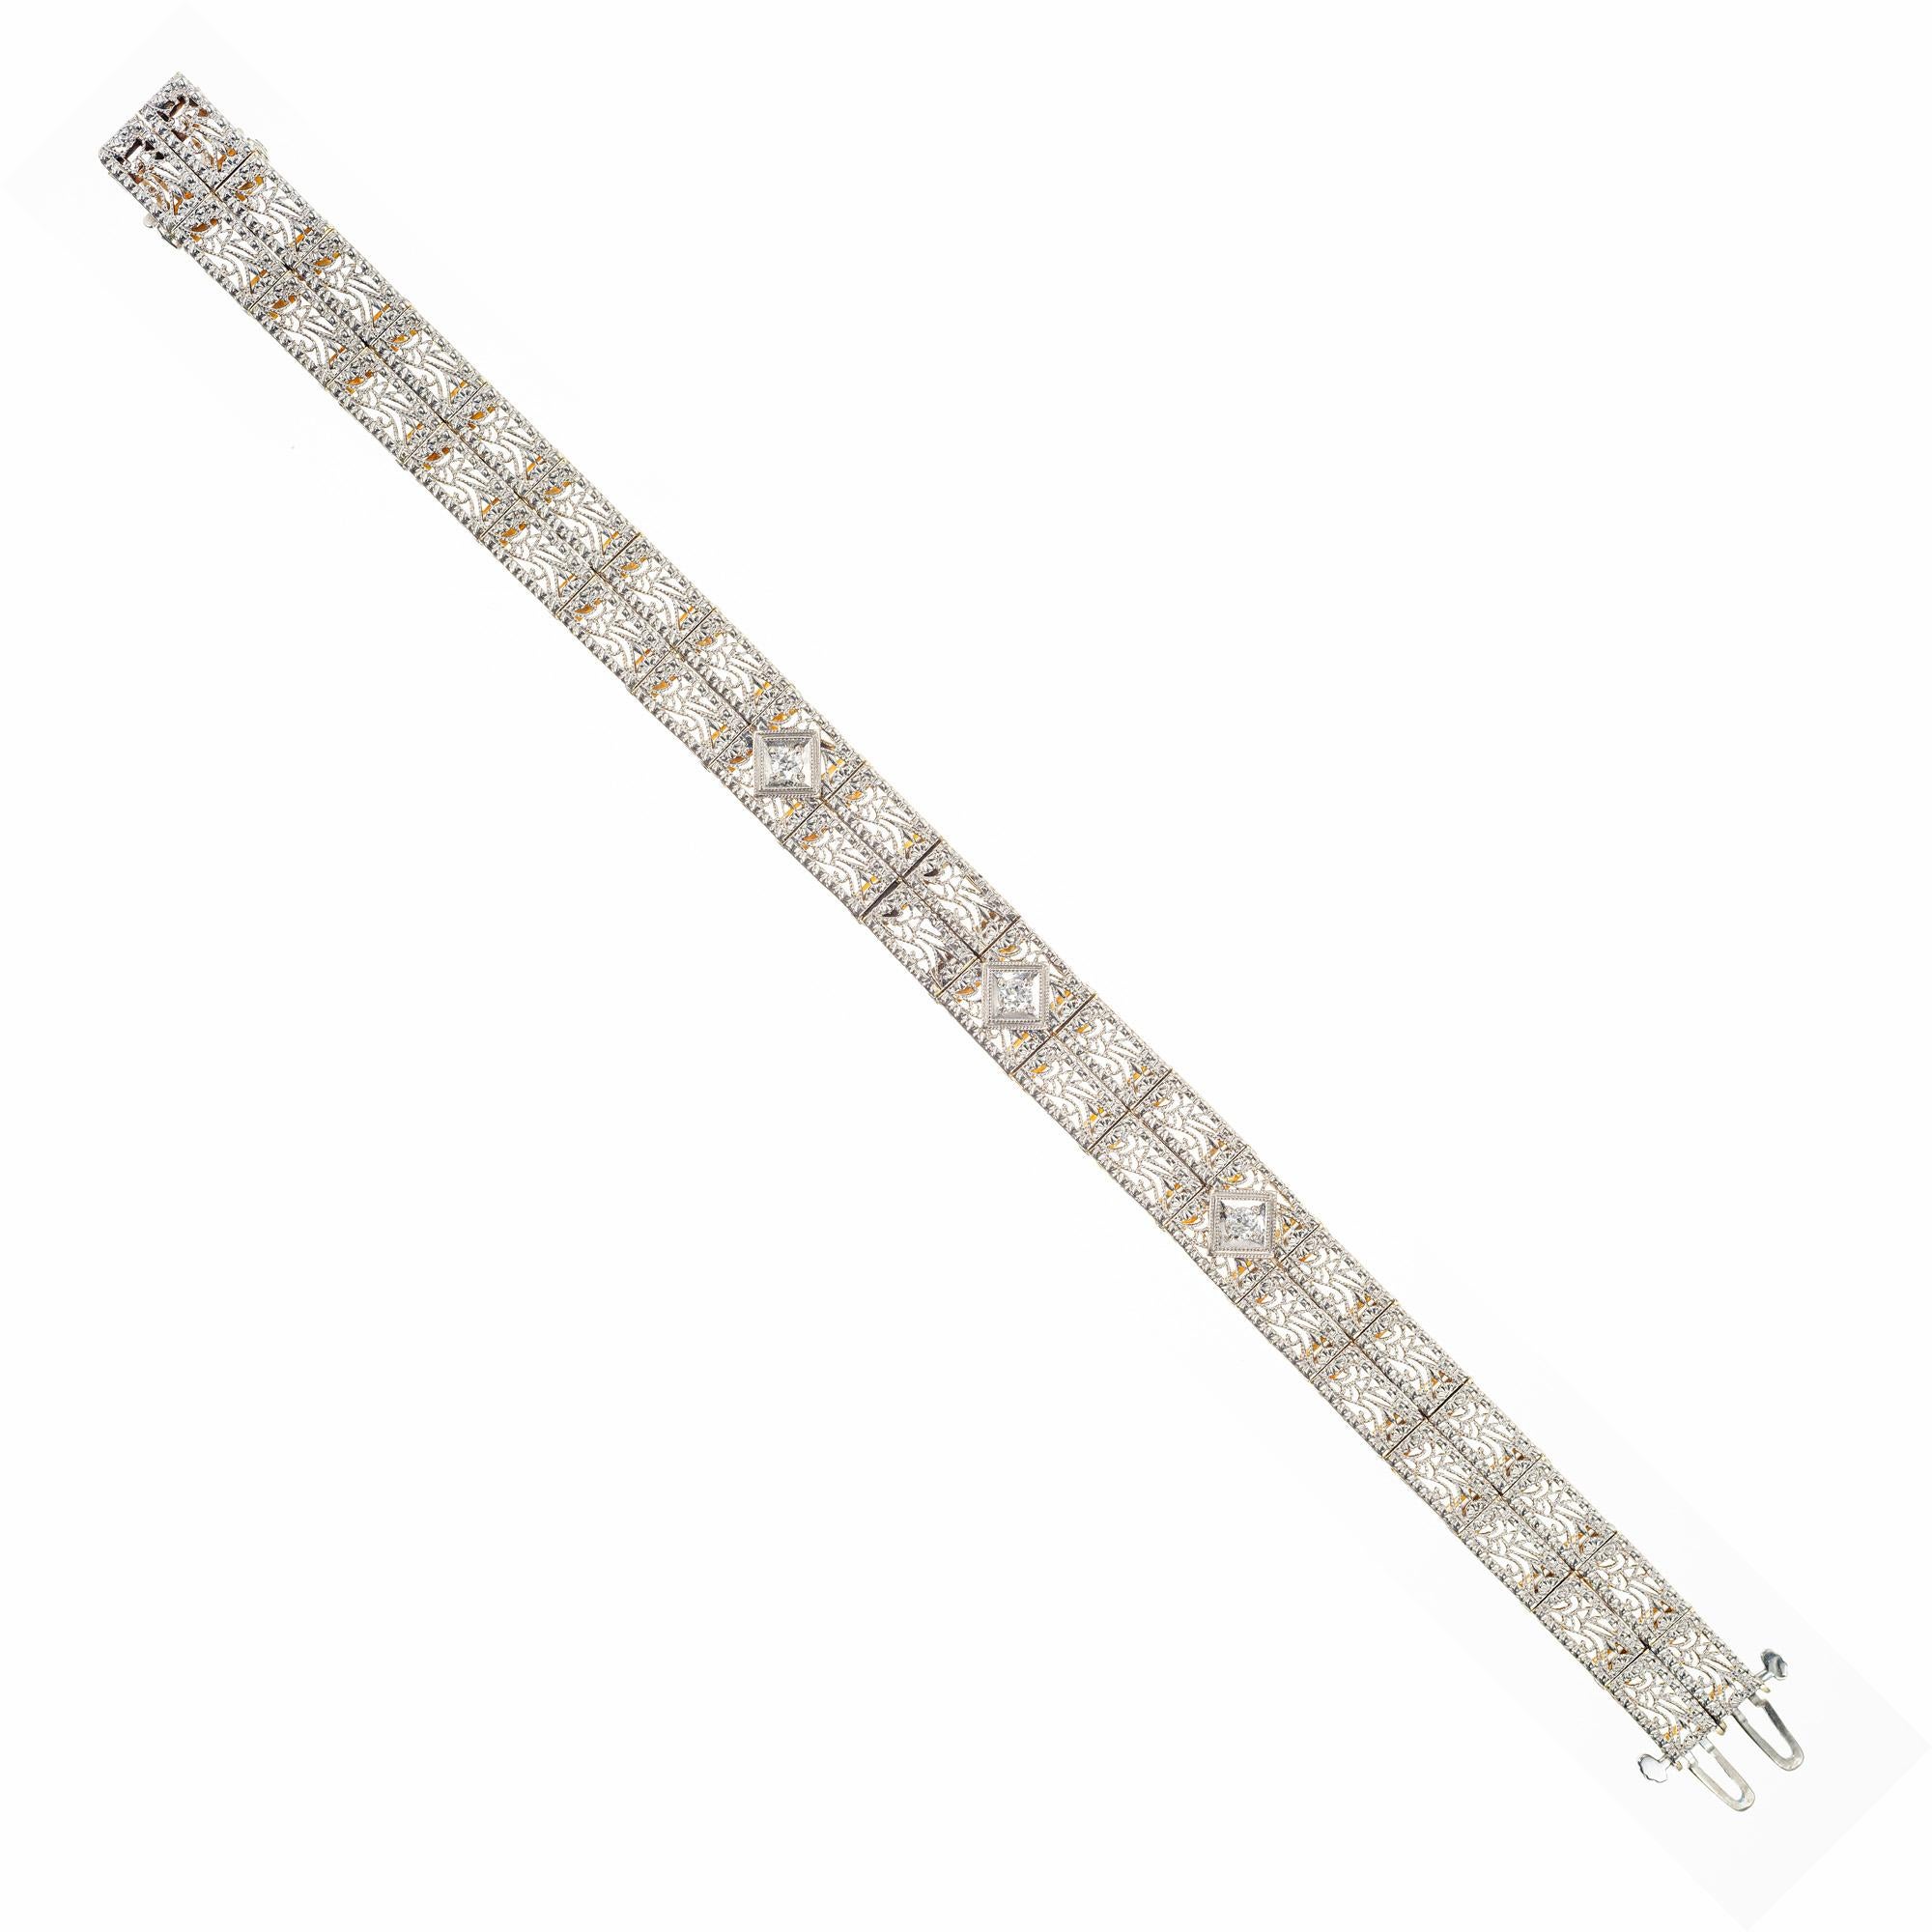 Captivating 9mm wide 14k white gold handcrafted filigree bracelet with 3 round diamonds equaling  .12cts. Circa 1930's. This bracelet features a double catch and underside safety for maximum protection to the wearer, while being extremely detailed